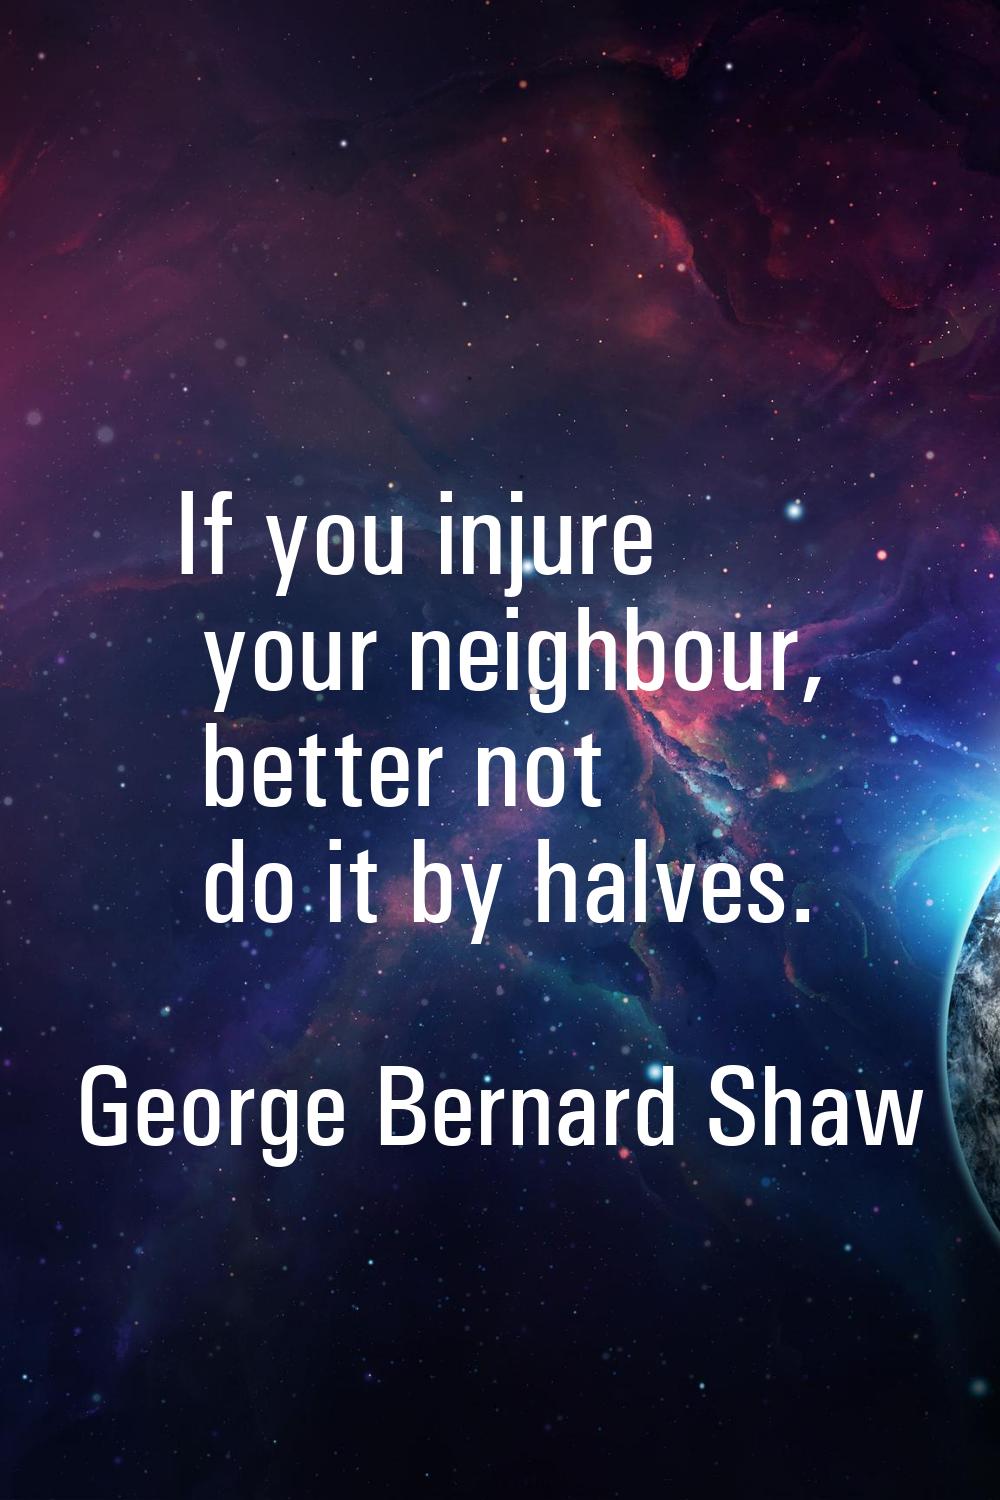 If you injure your neighbour, better not do it by halves.